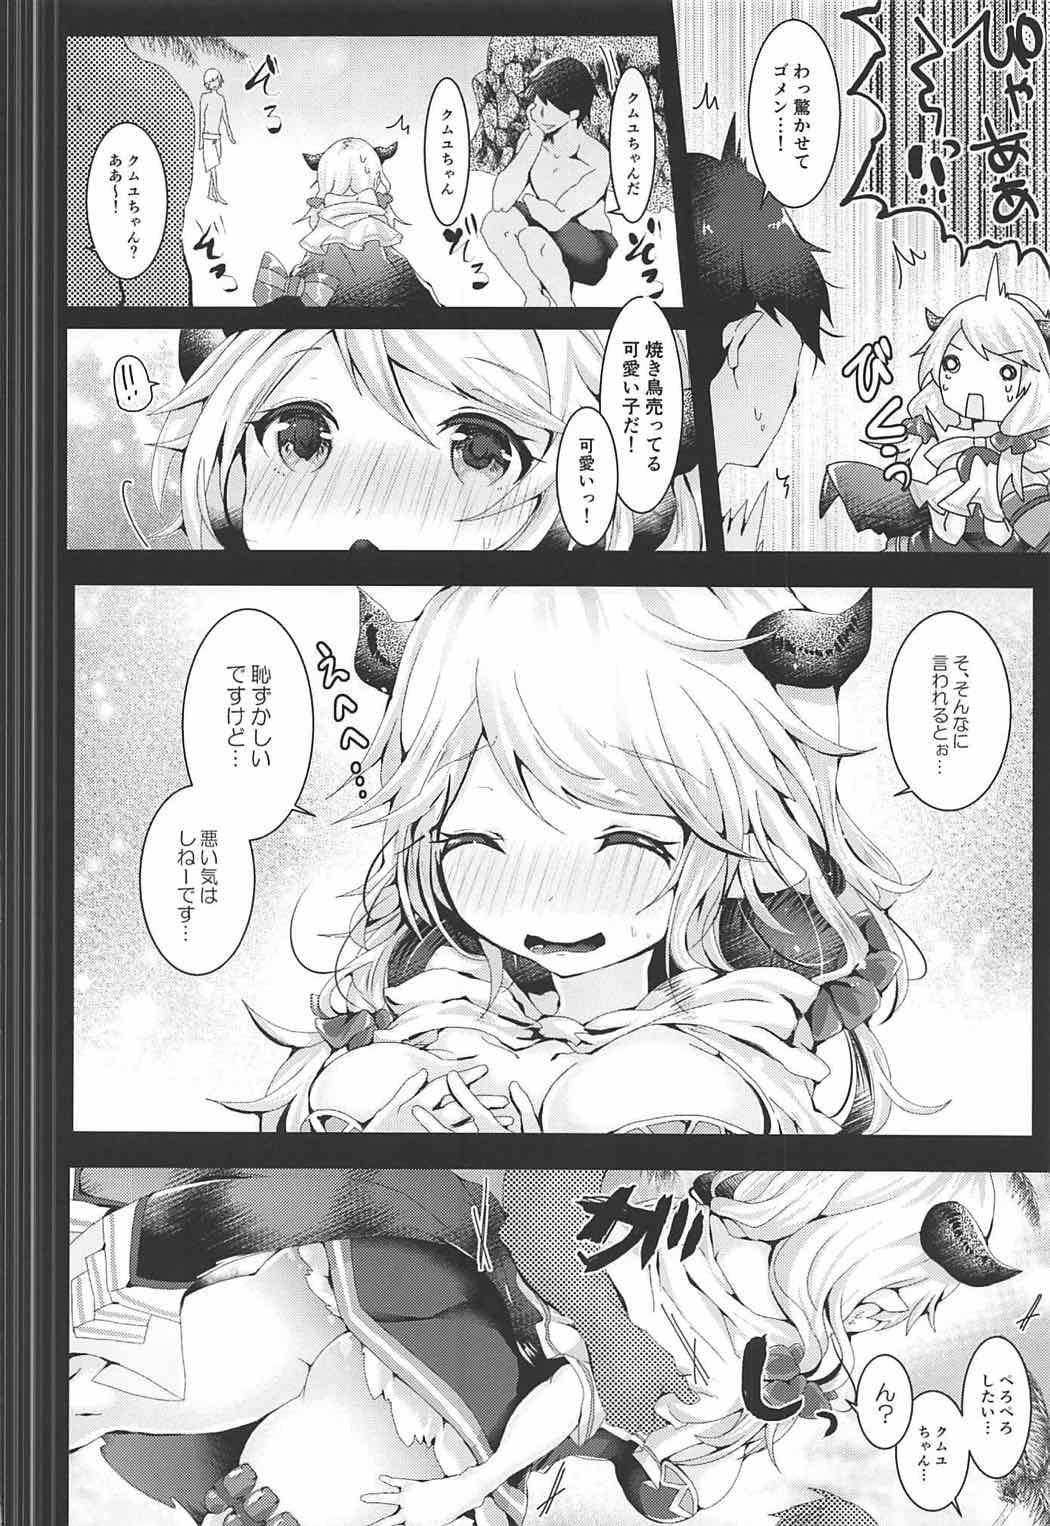 Blondes Torotoro Vacation - Granblue fantasy Stepdaughter - Page 7